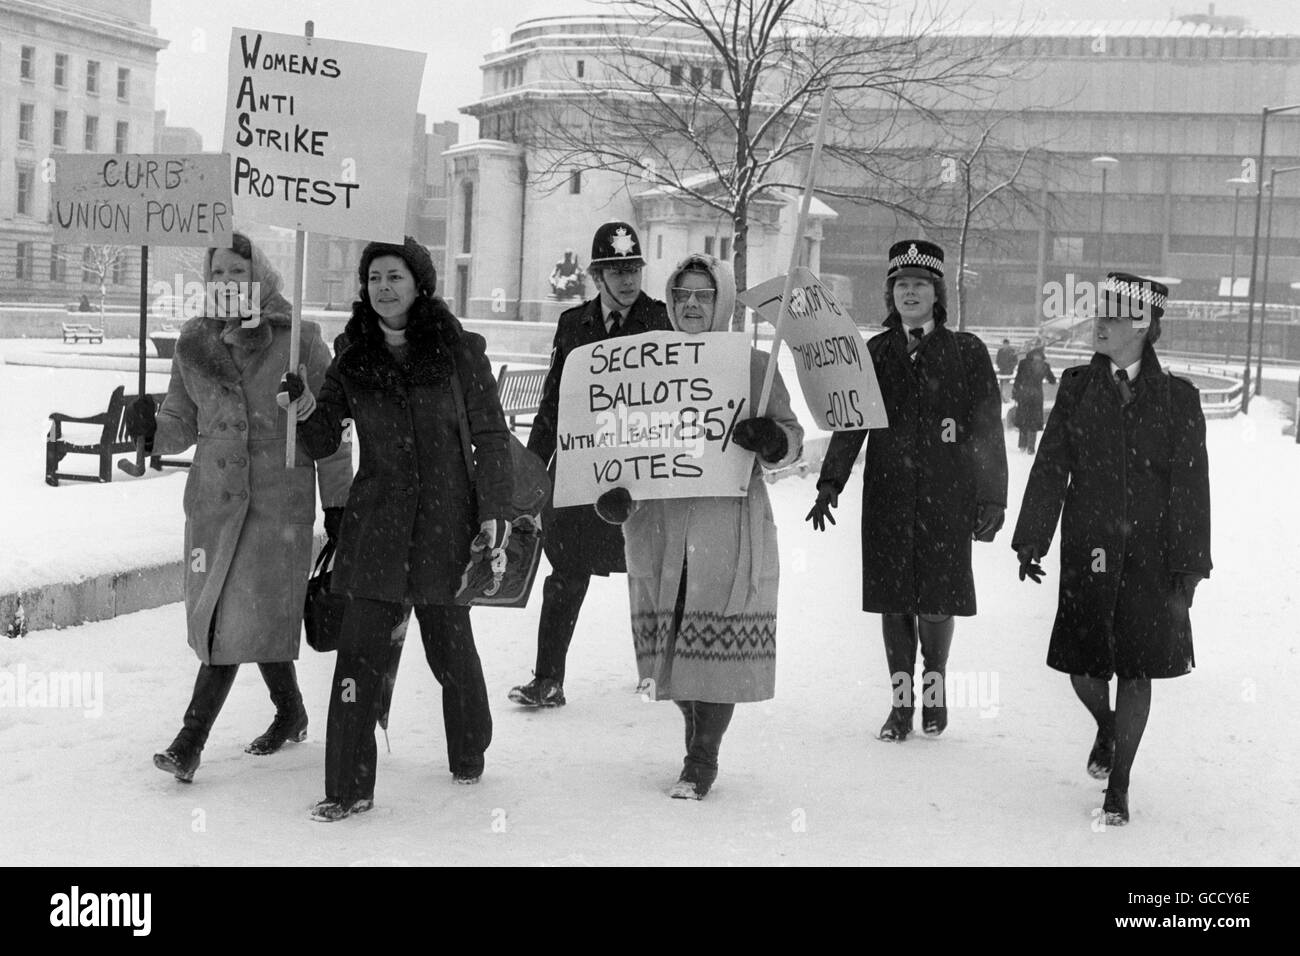 A police escort for these angry women in Birmingham as they march through the snow to deliver a housewives' anti-strike petition to the offices of the Transport and General Workers' Union. Stock Photo